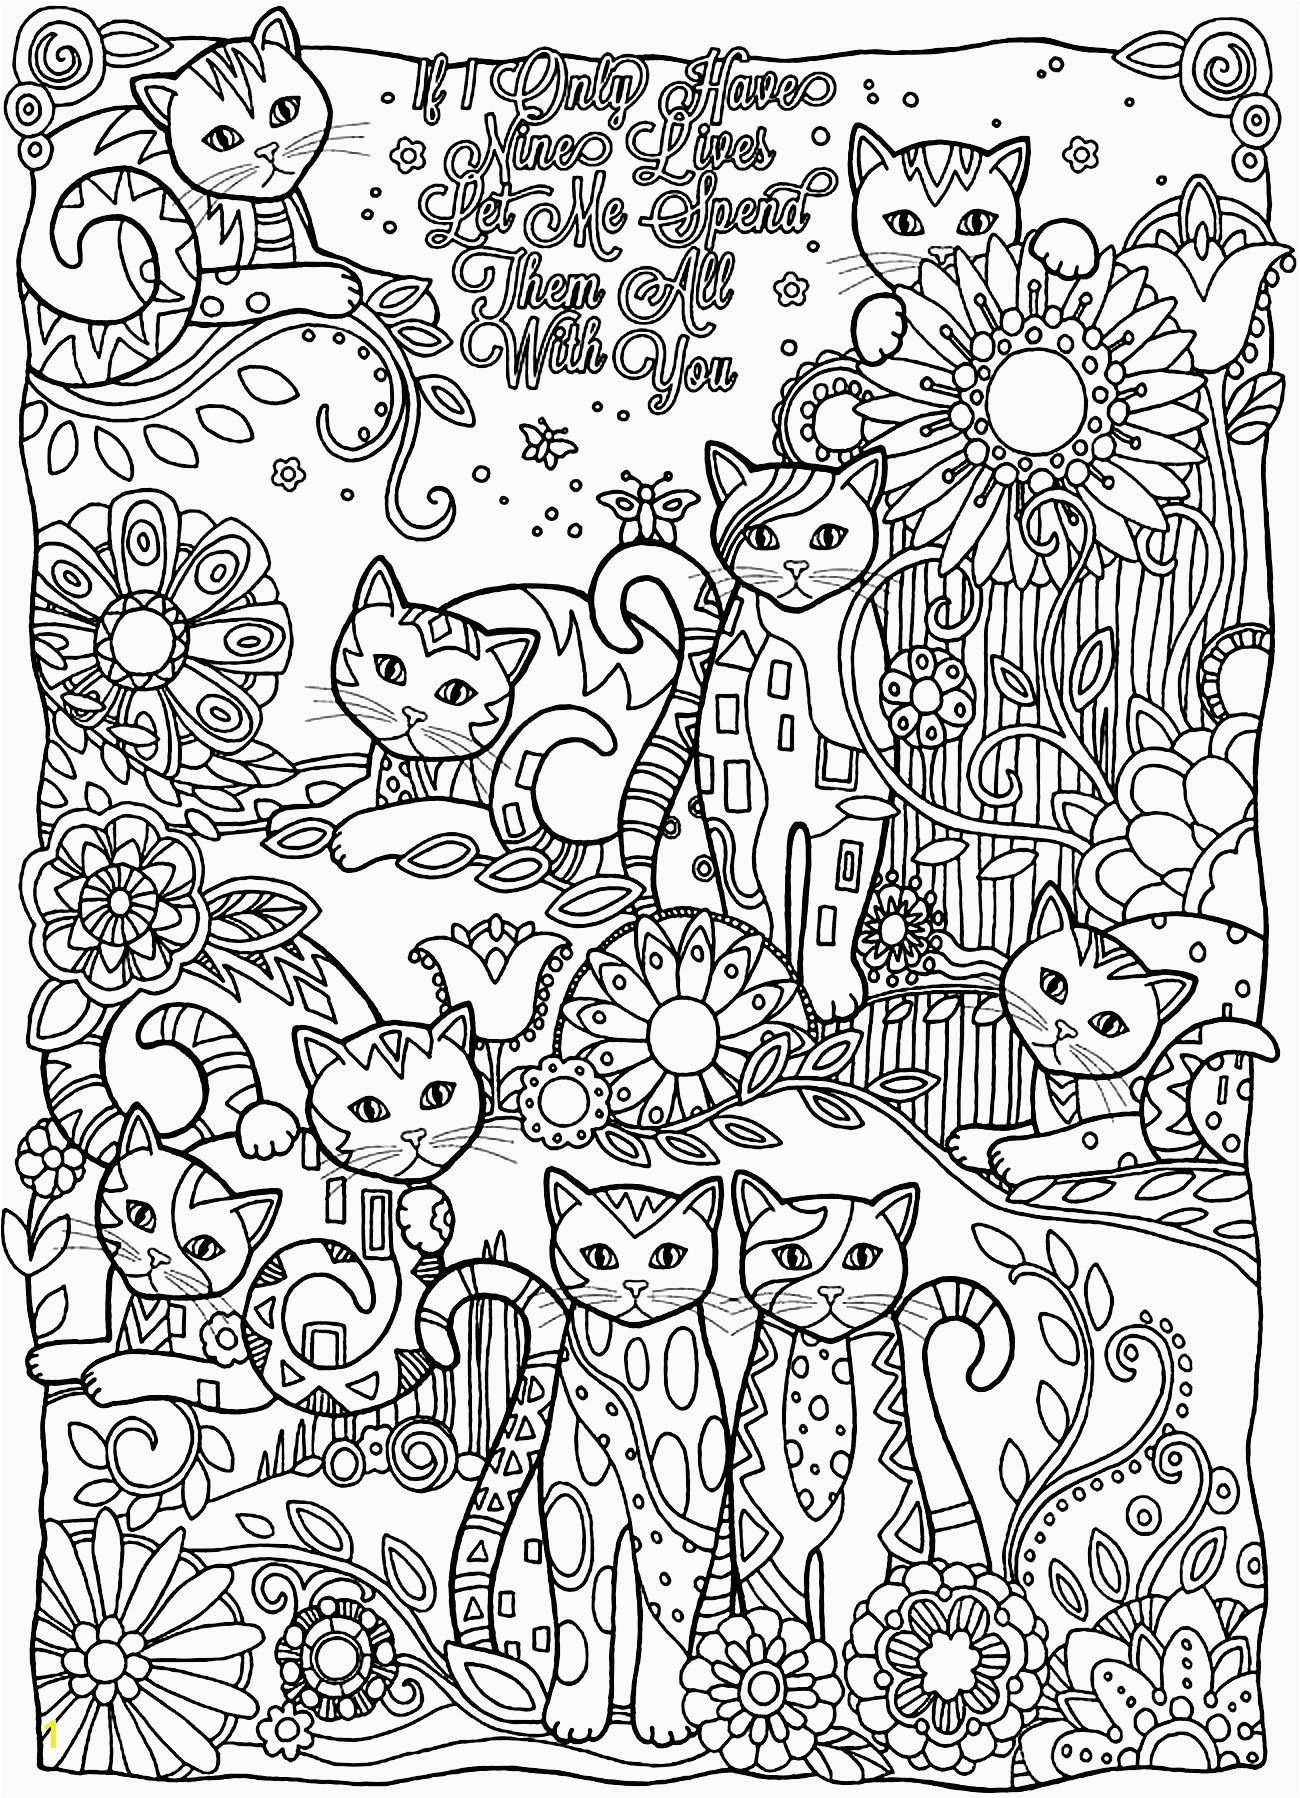 Abstract Coloring Pages for Teenagers Difficult Abstract Coloring Pages for Teenagers Difficult Fresh Cool Cute